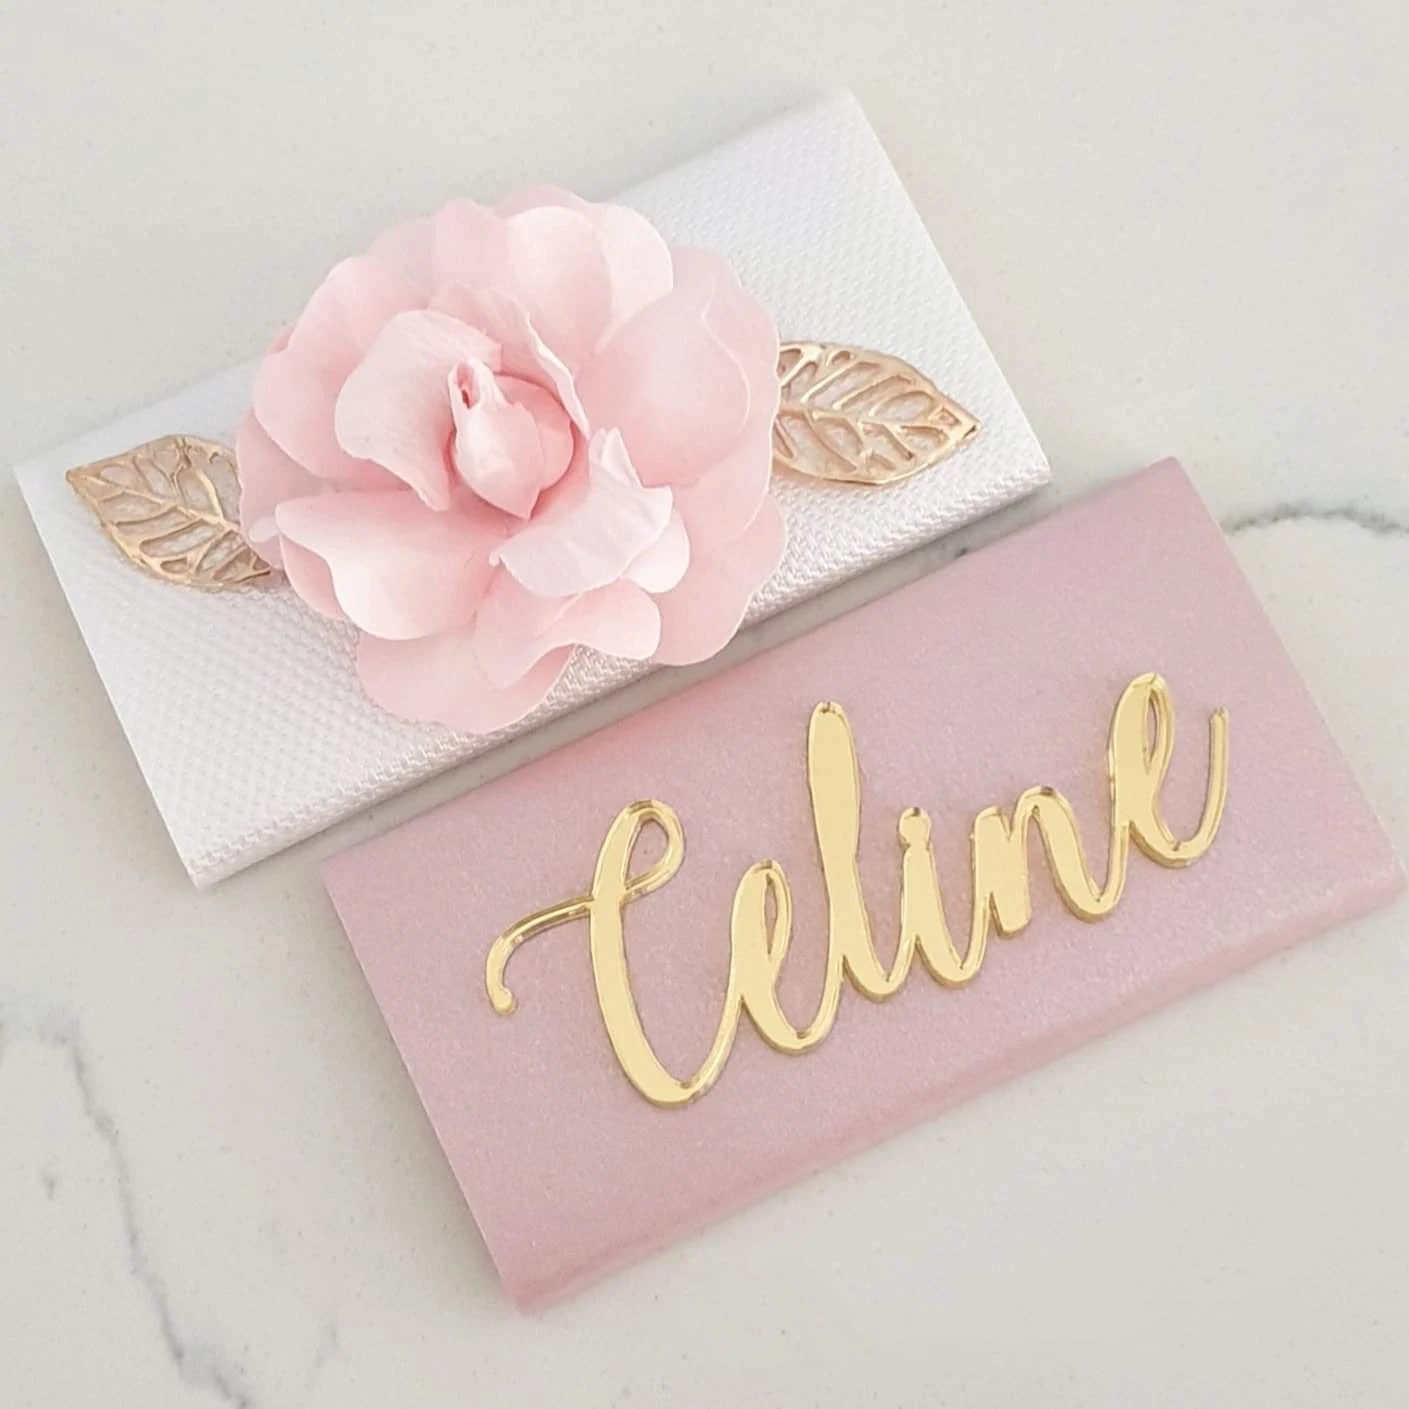 

12 Pcs Same Personalized Laser Cut Acrylic Gold Mirror Plaques Baby Name Decorated Chocolate Christening & Baptism Box Banner